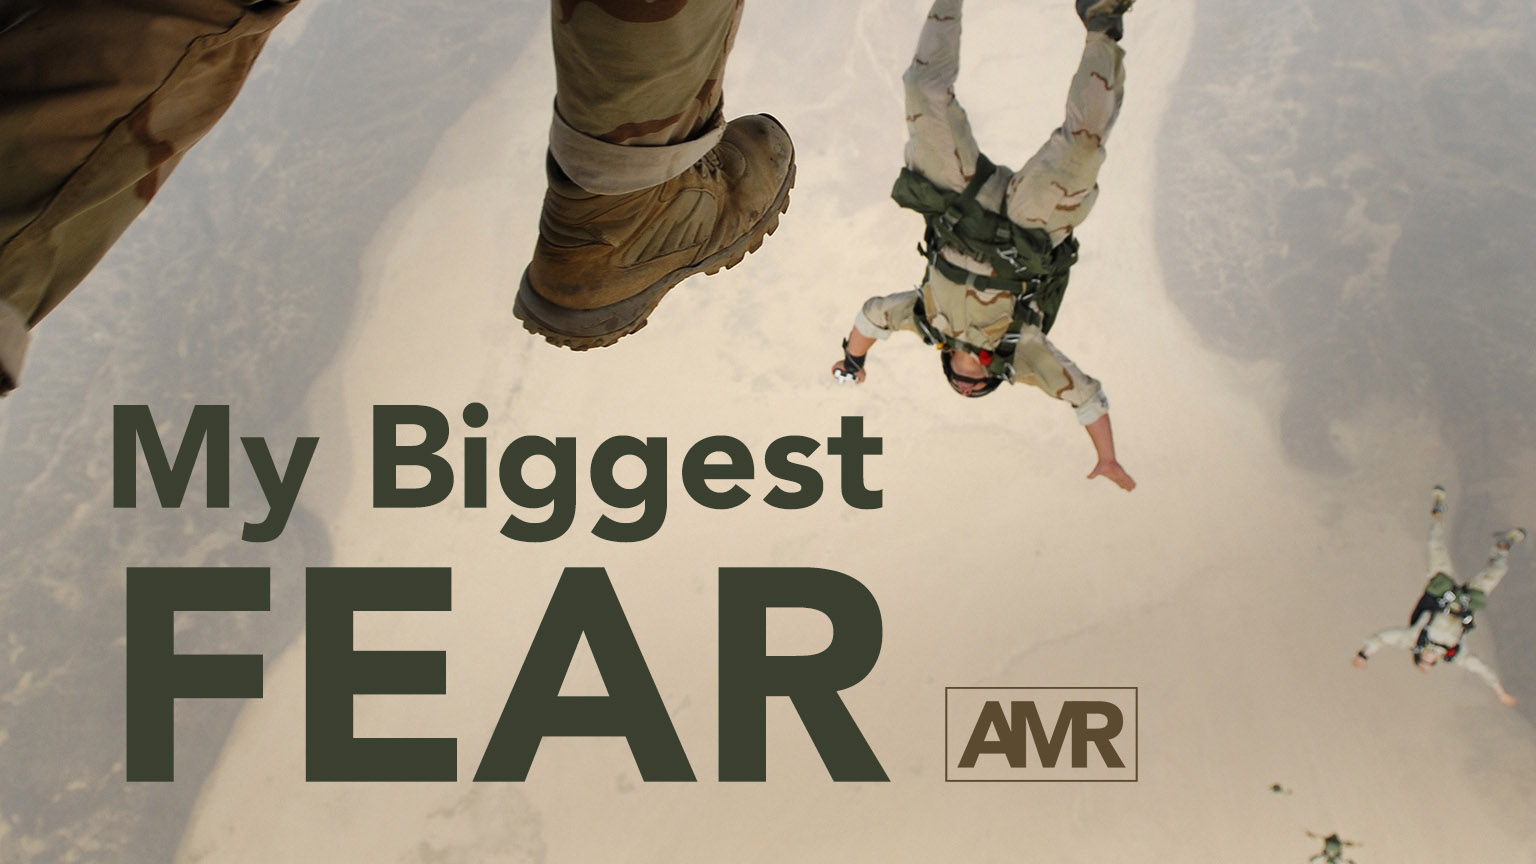 My Biggest Fear - military paratroopers jumping out of plane